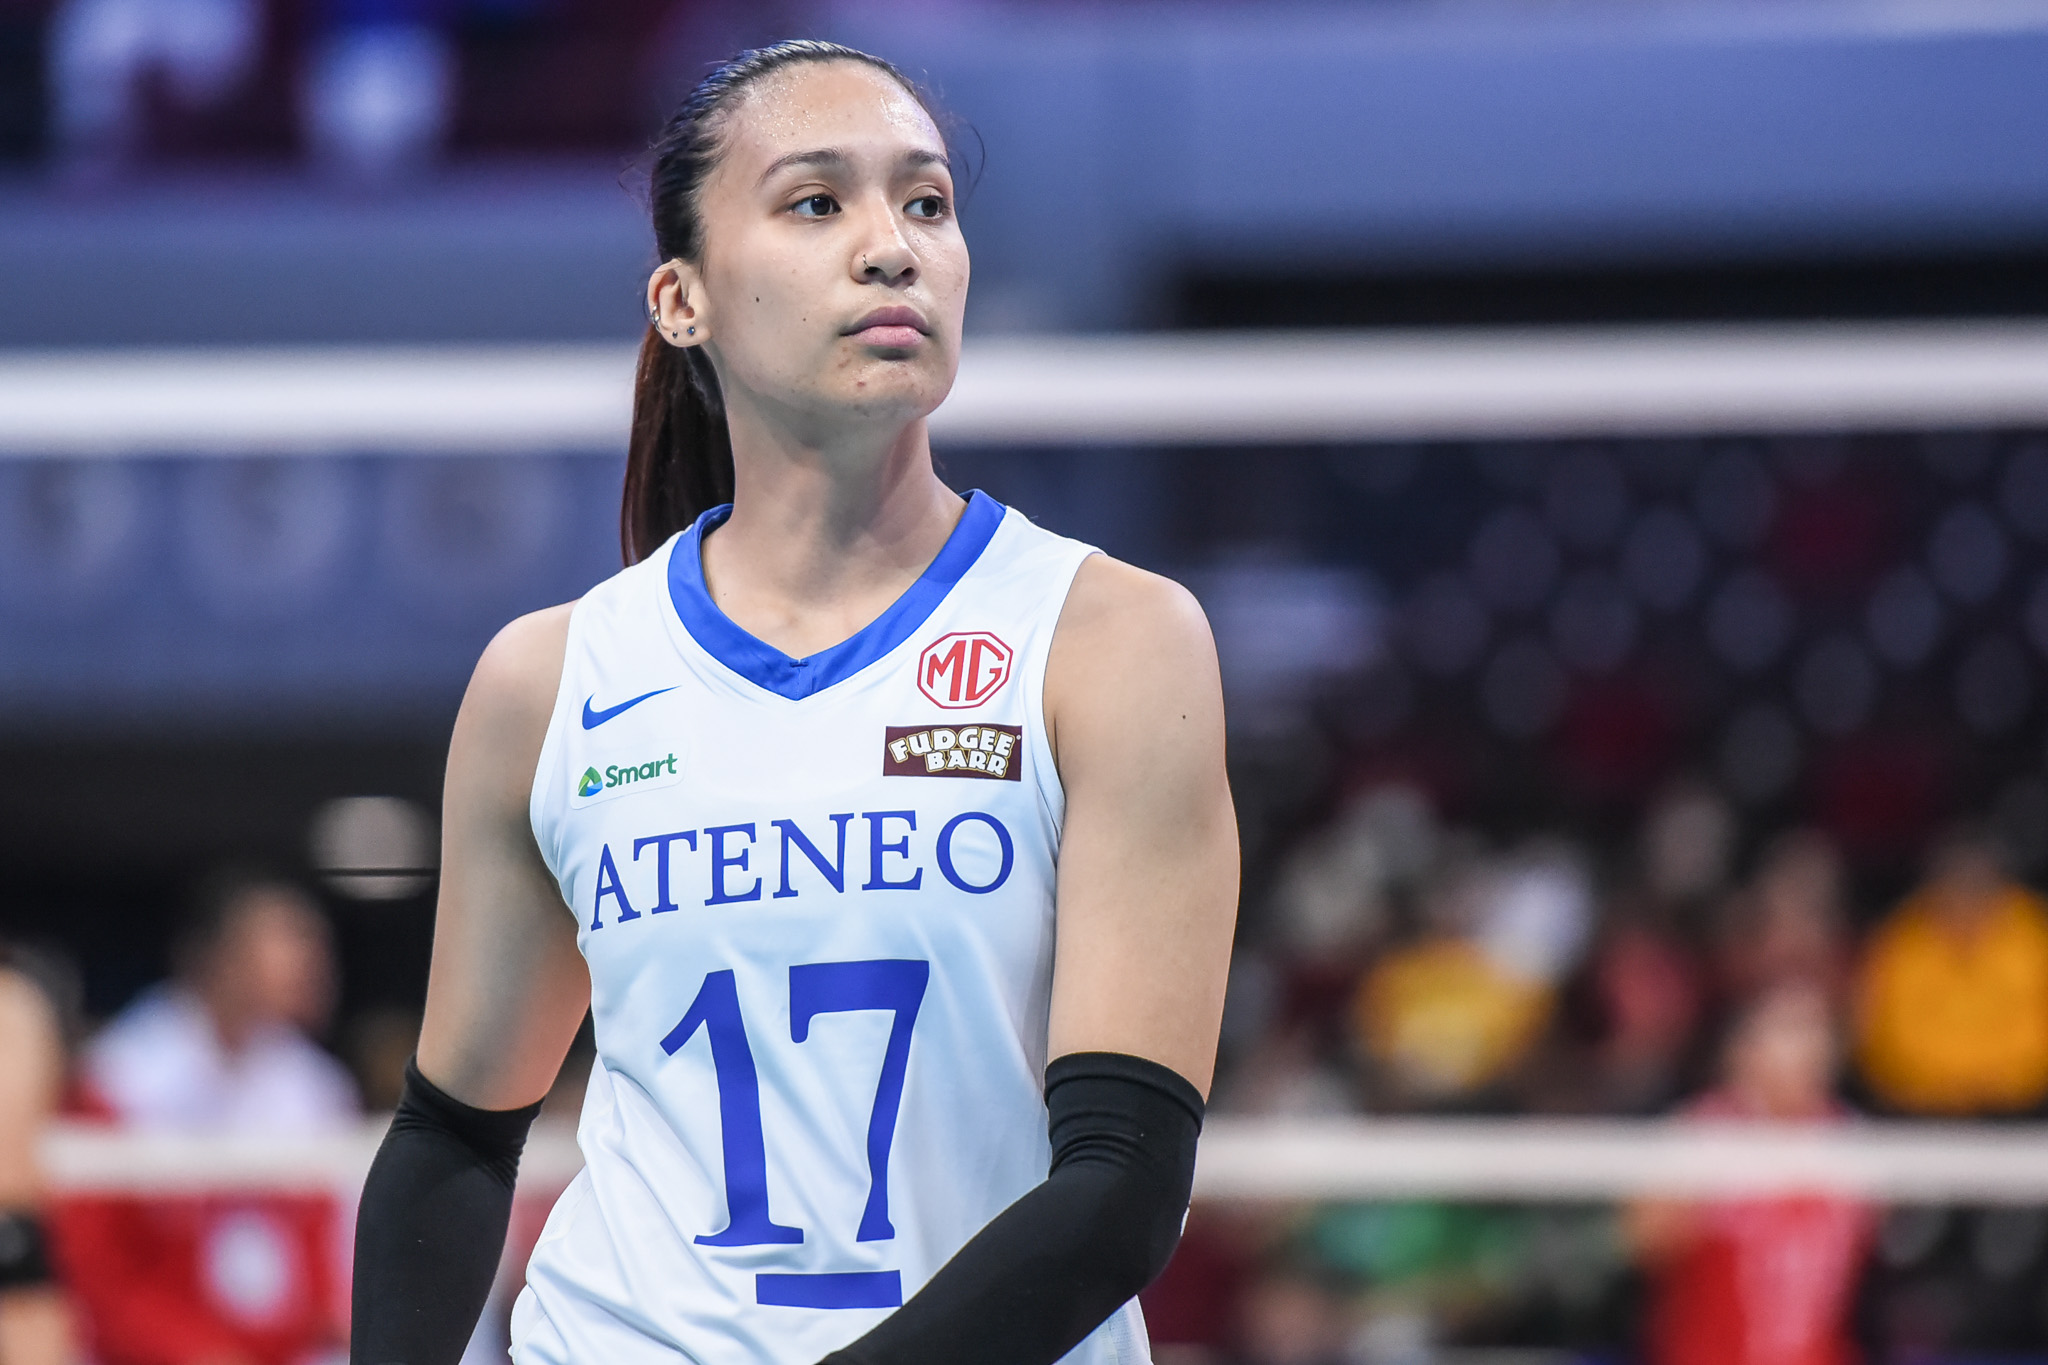 UAAP-85-WVB-ADMU-vs.-UE-Faith-Nisperos-1252 Almadro clears air on viral video: 'That's all just snippets' ADMU News UAAP Volleyball  - philippine sports news